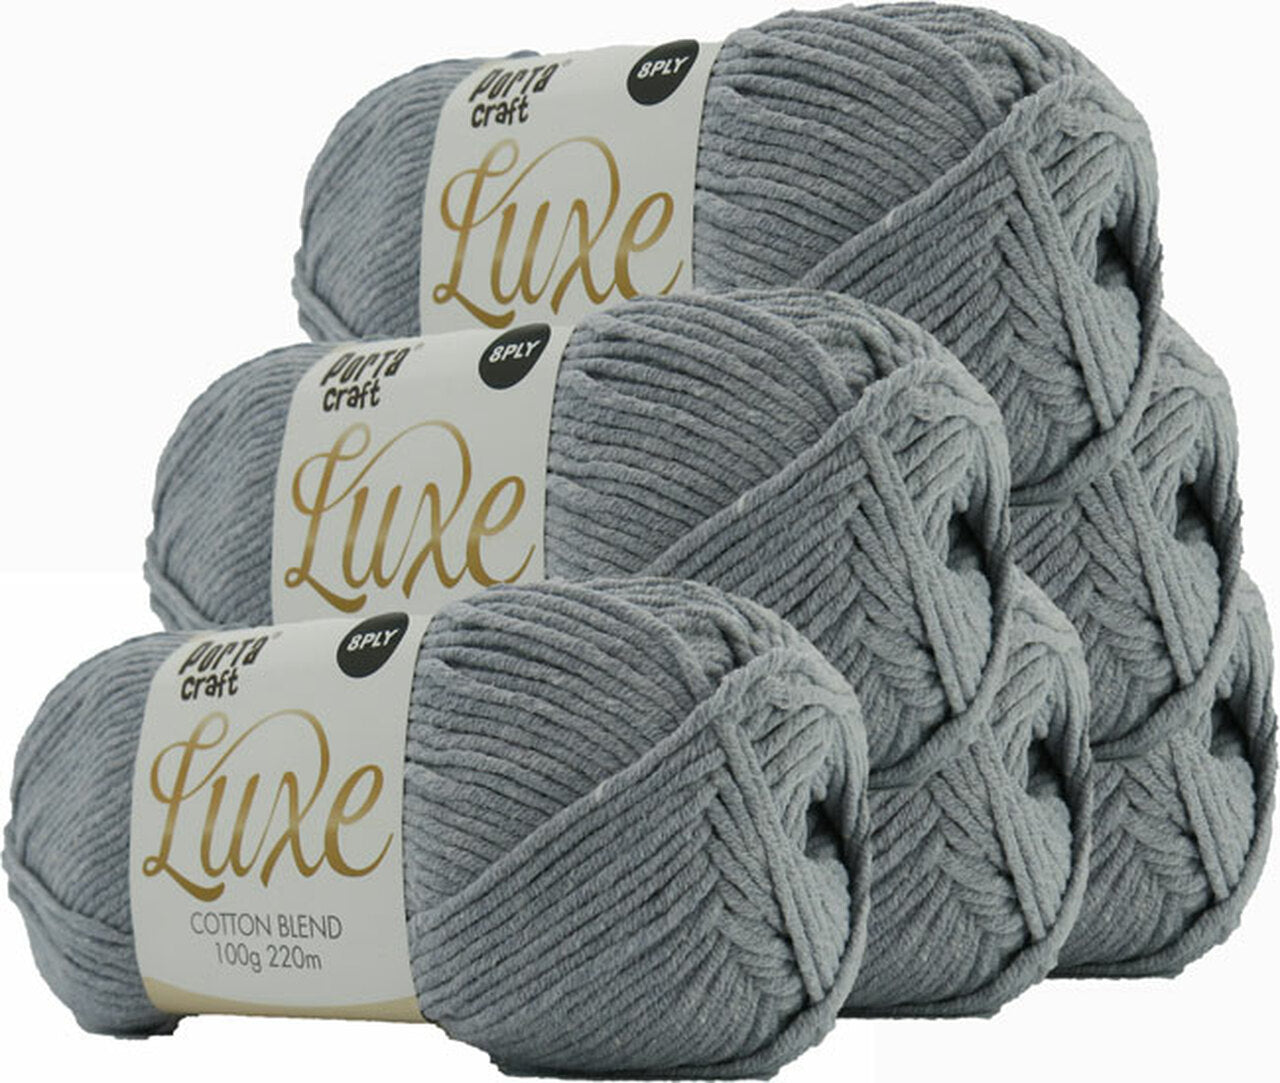 Luxe Cotton Blend Yarn 100g 220m 8ply - Overcast